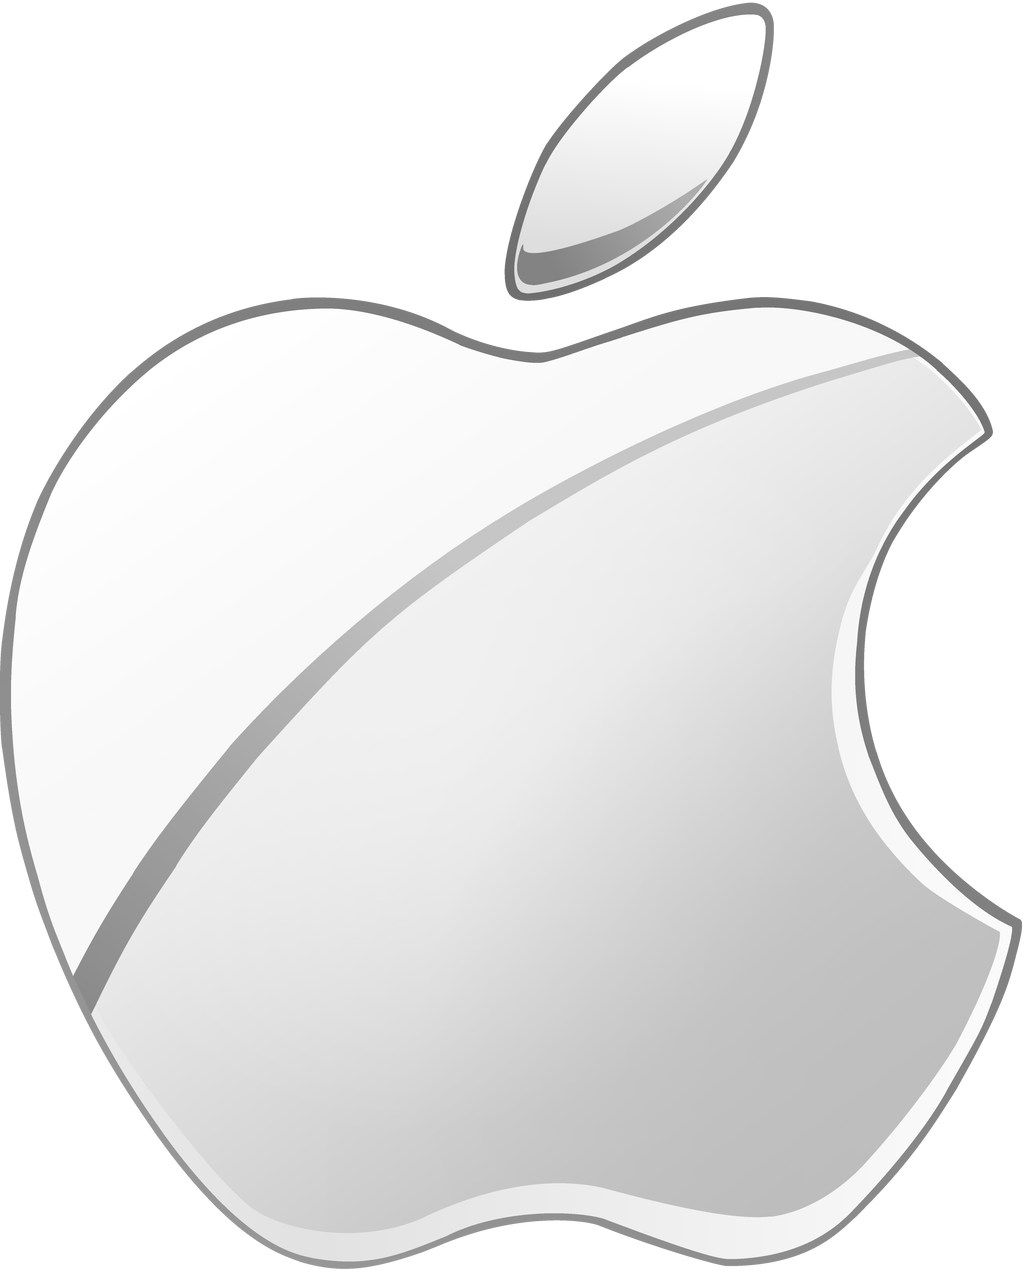 late gift)Silver Apple logo vector(2) by WindyThePlaneh on DeviantArt